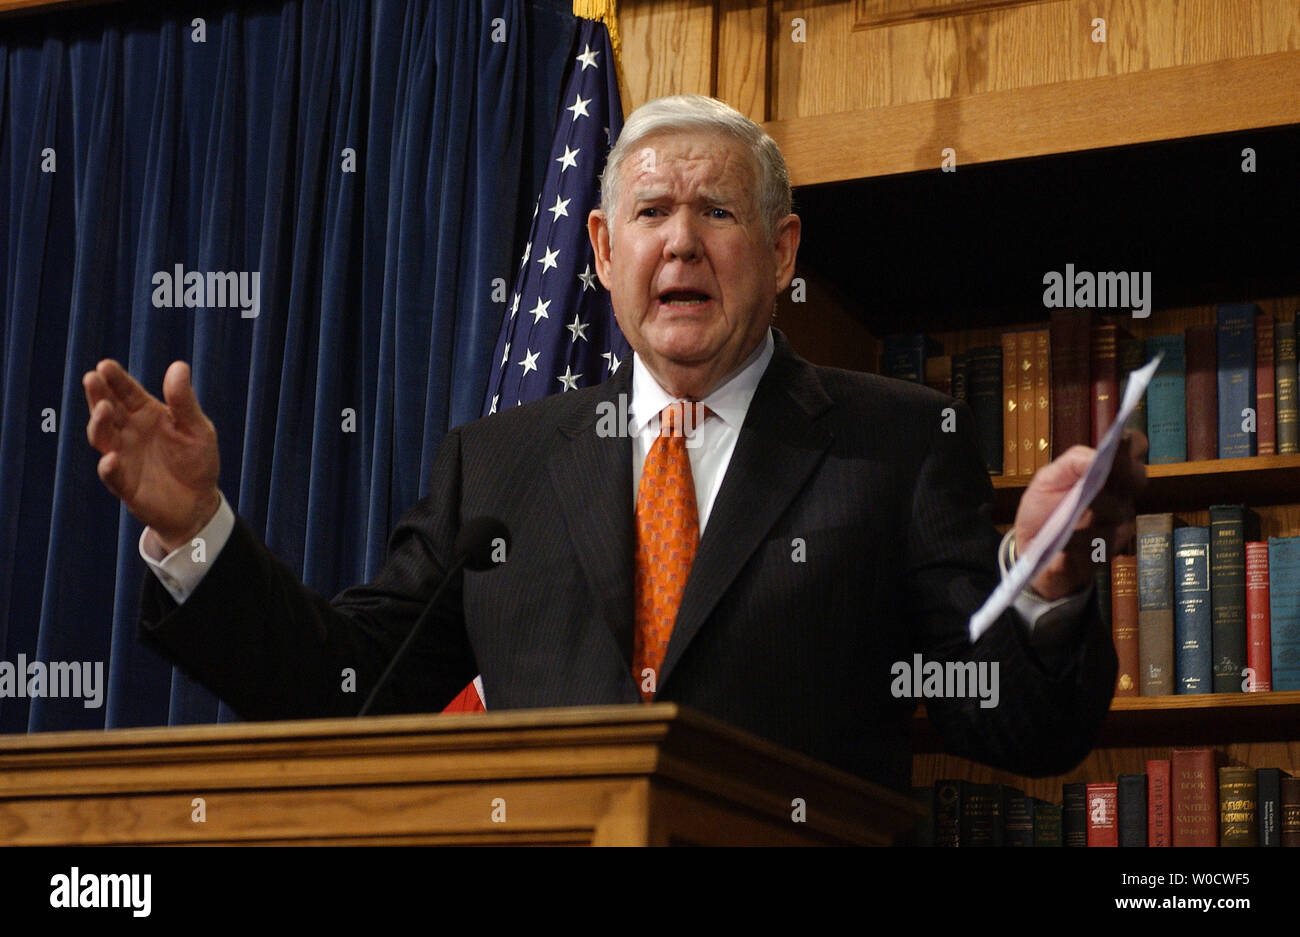 Rep. John Murtha, D-Pa., reacts to President Bush's speech on Iraq from earlier in the day during a news conference on Capitol Hill in Washington on December 7, 2005. Murtha reiterated his call for the U.S. to begin immediately withdrawing its troops because they are making the situation worse, not better.   (UPI Photo/Roger L. Wollenberg) Stock Photo